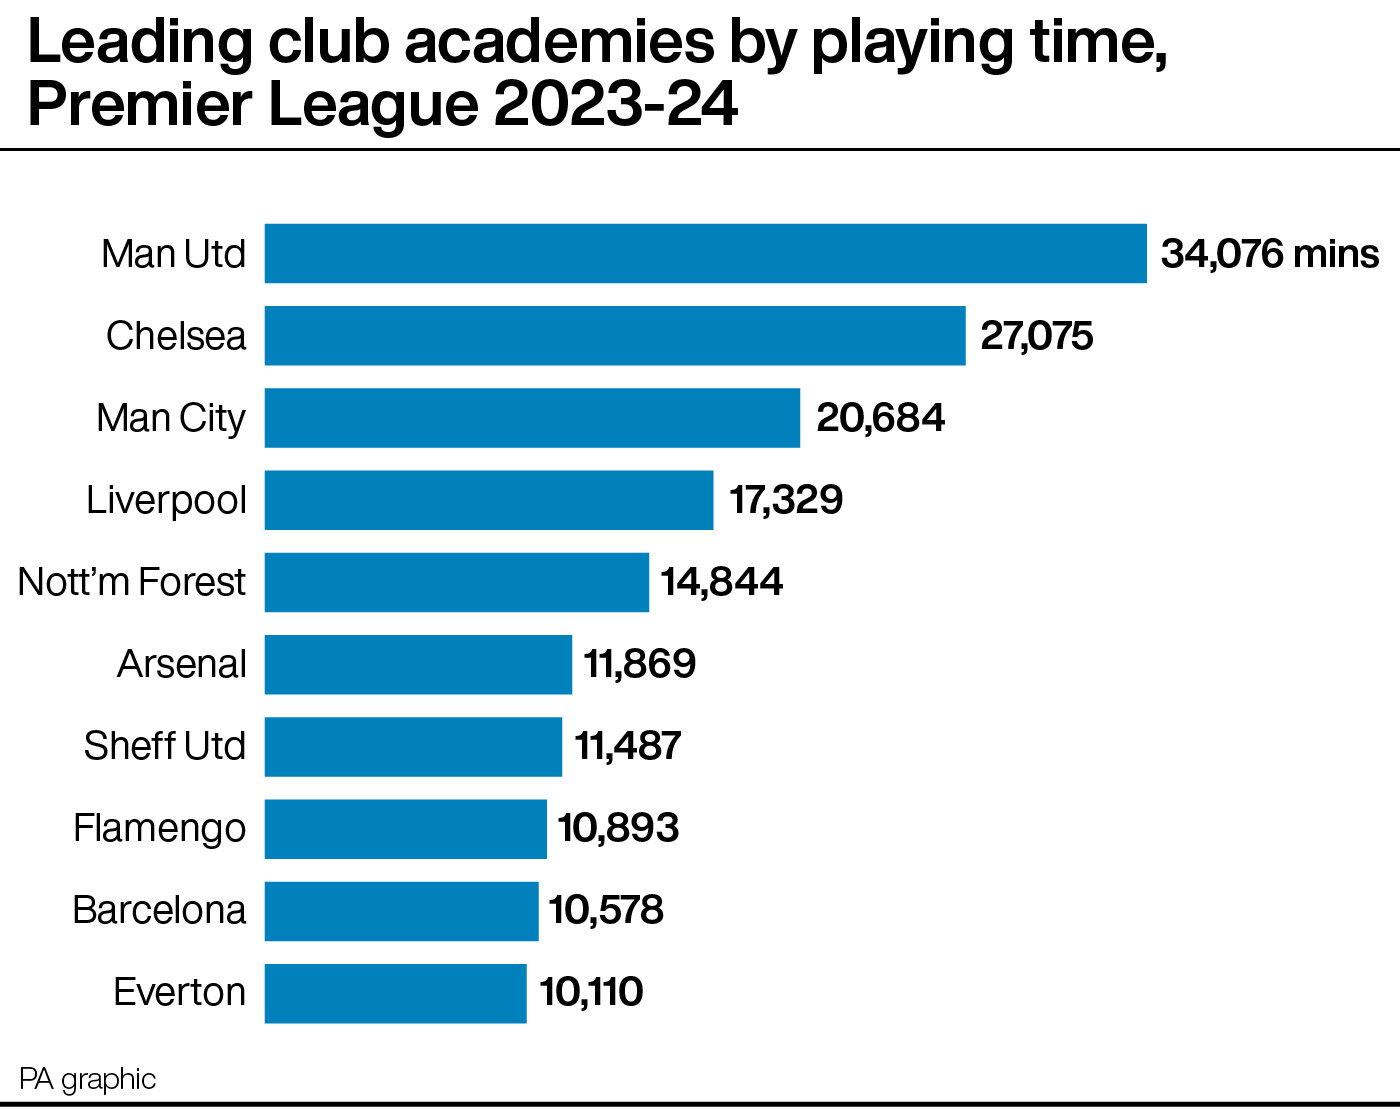 Graphic showing the leading club academies by playing time in the 2023-24 Premier League